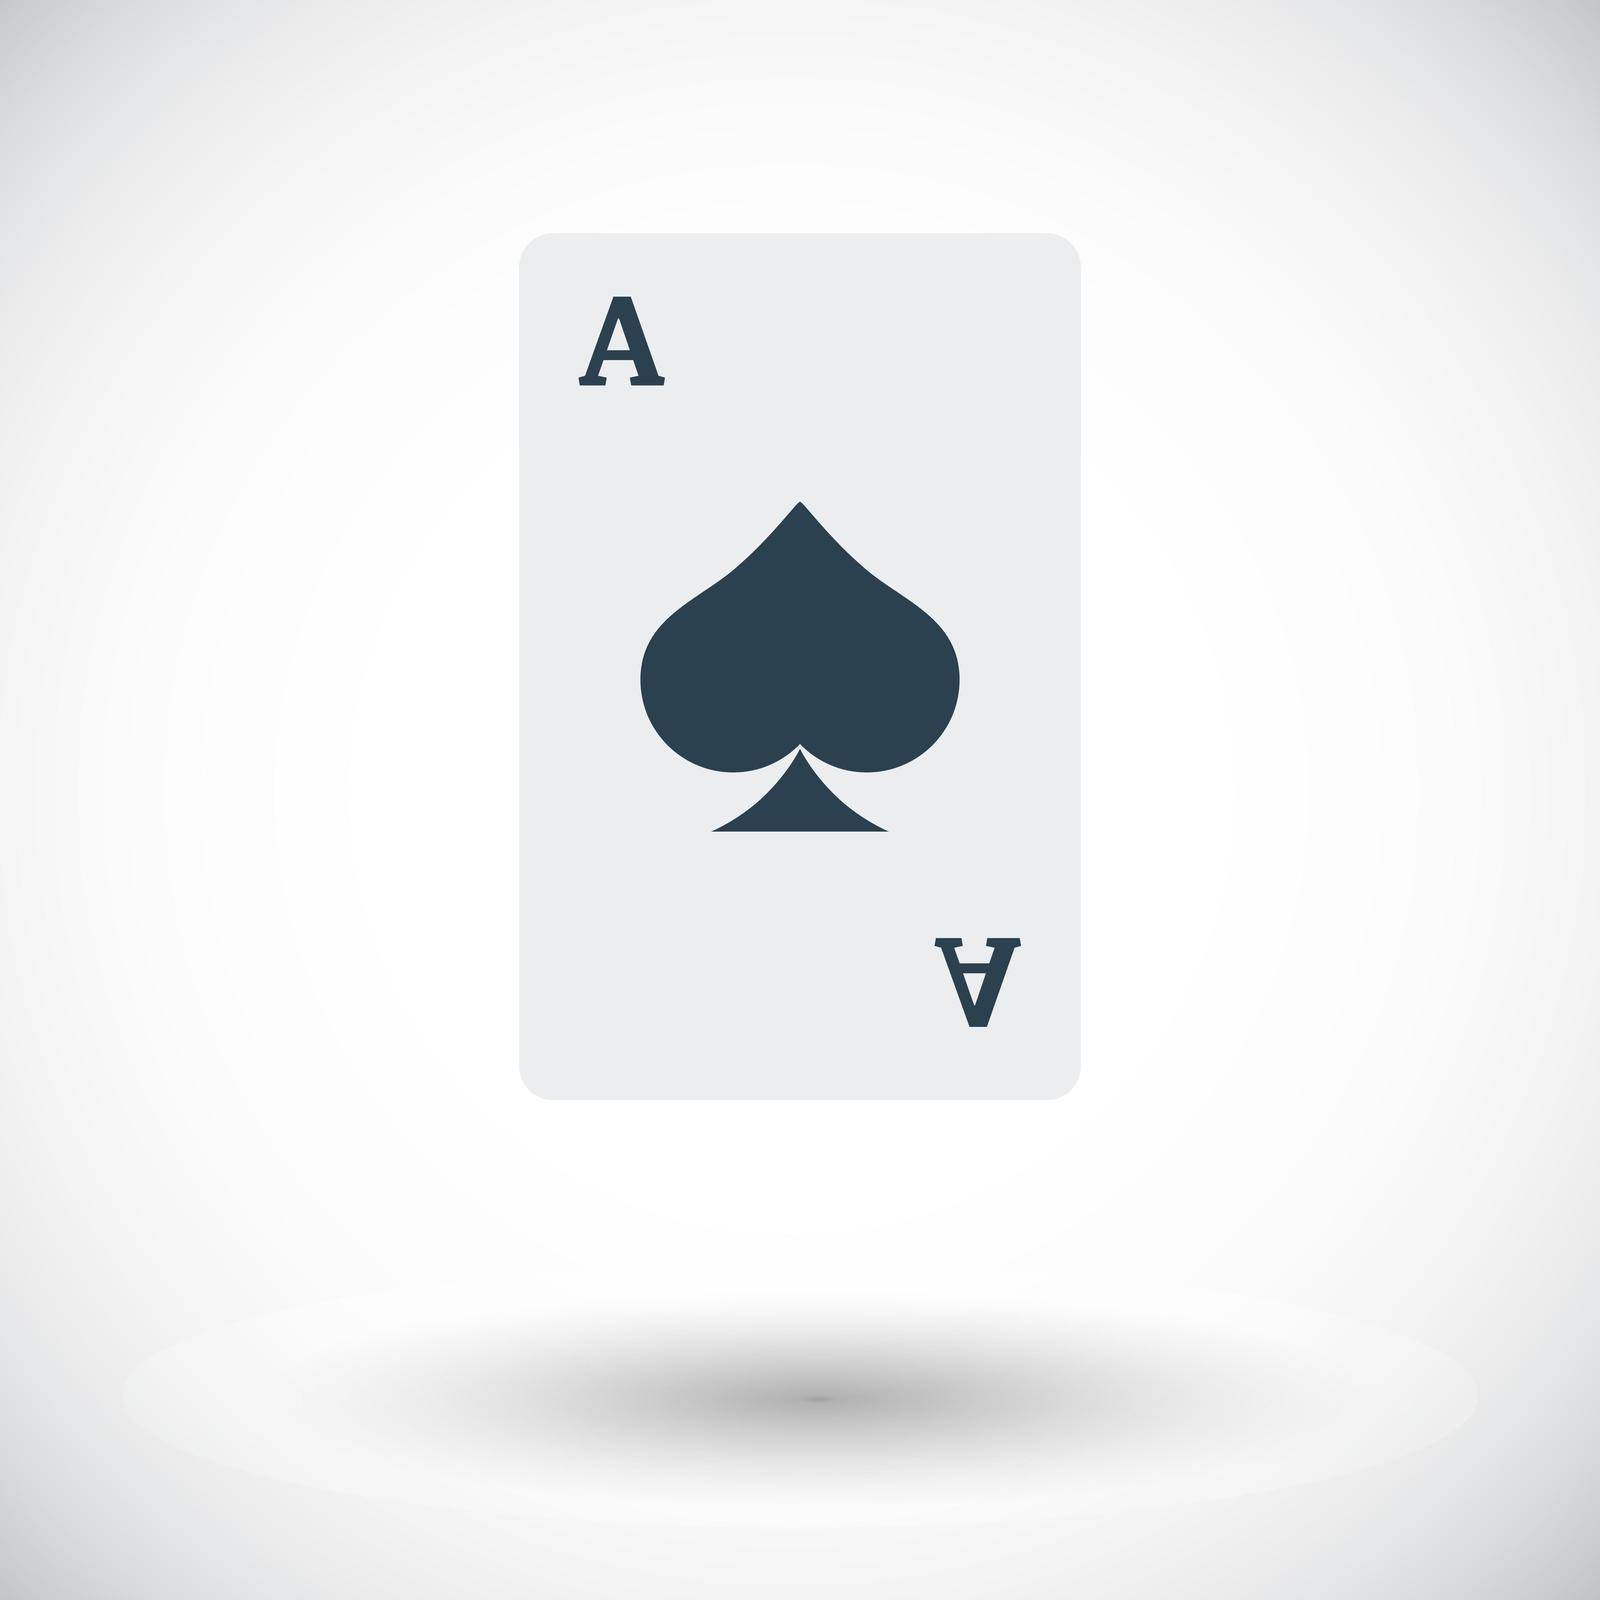 Play card icon. Flat vector related icon for web and mobile applications. It can be used as - logo, pictogram, icon, infographic element. Vector Illustration.